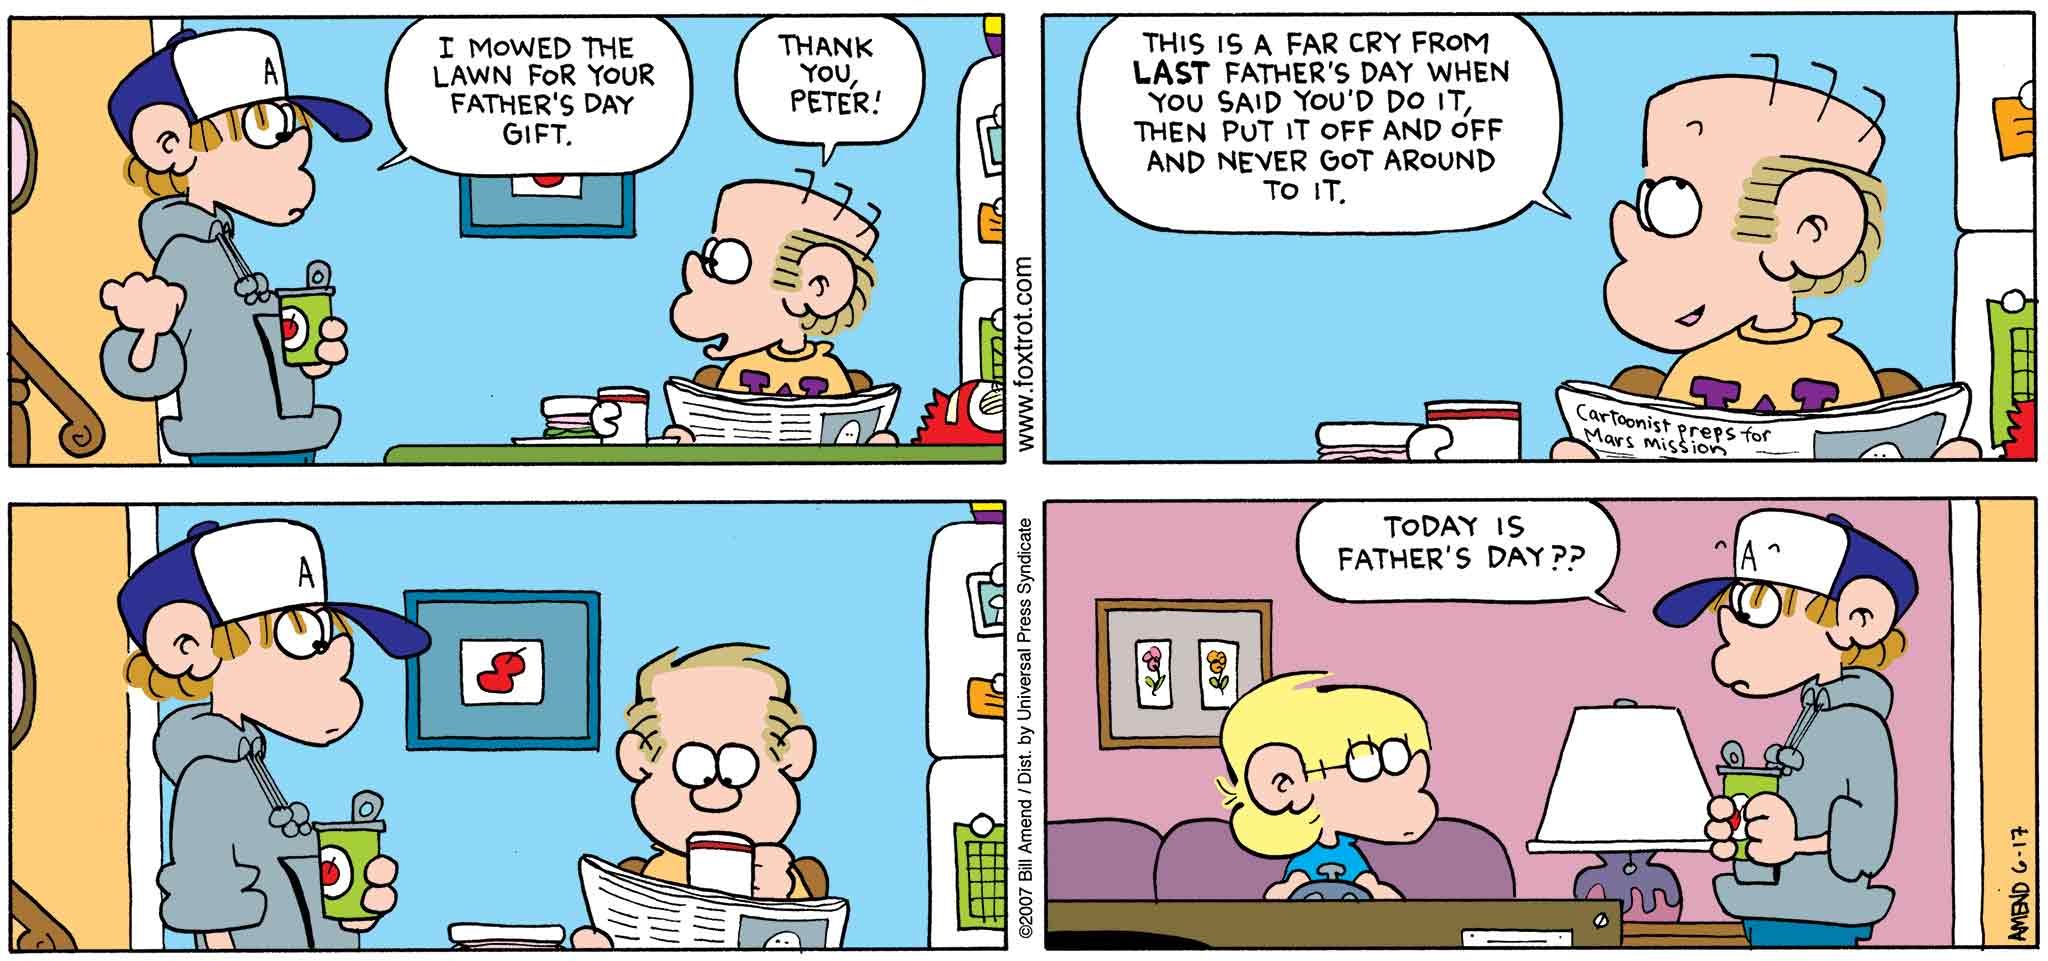 FoxTrot by Bill Amend - Father's Day comic published June 17, 2007 - Peter: I mowed the lawn for your Father's Day gift. Roger: Thank you, Peter. This is a far cry from last Father's Day when you said you'd do it, then put it off and off and never got around to it. Peter: Today is Father's Day??